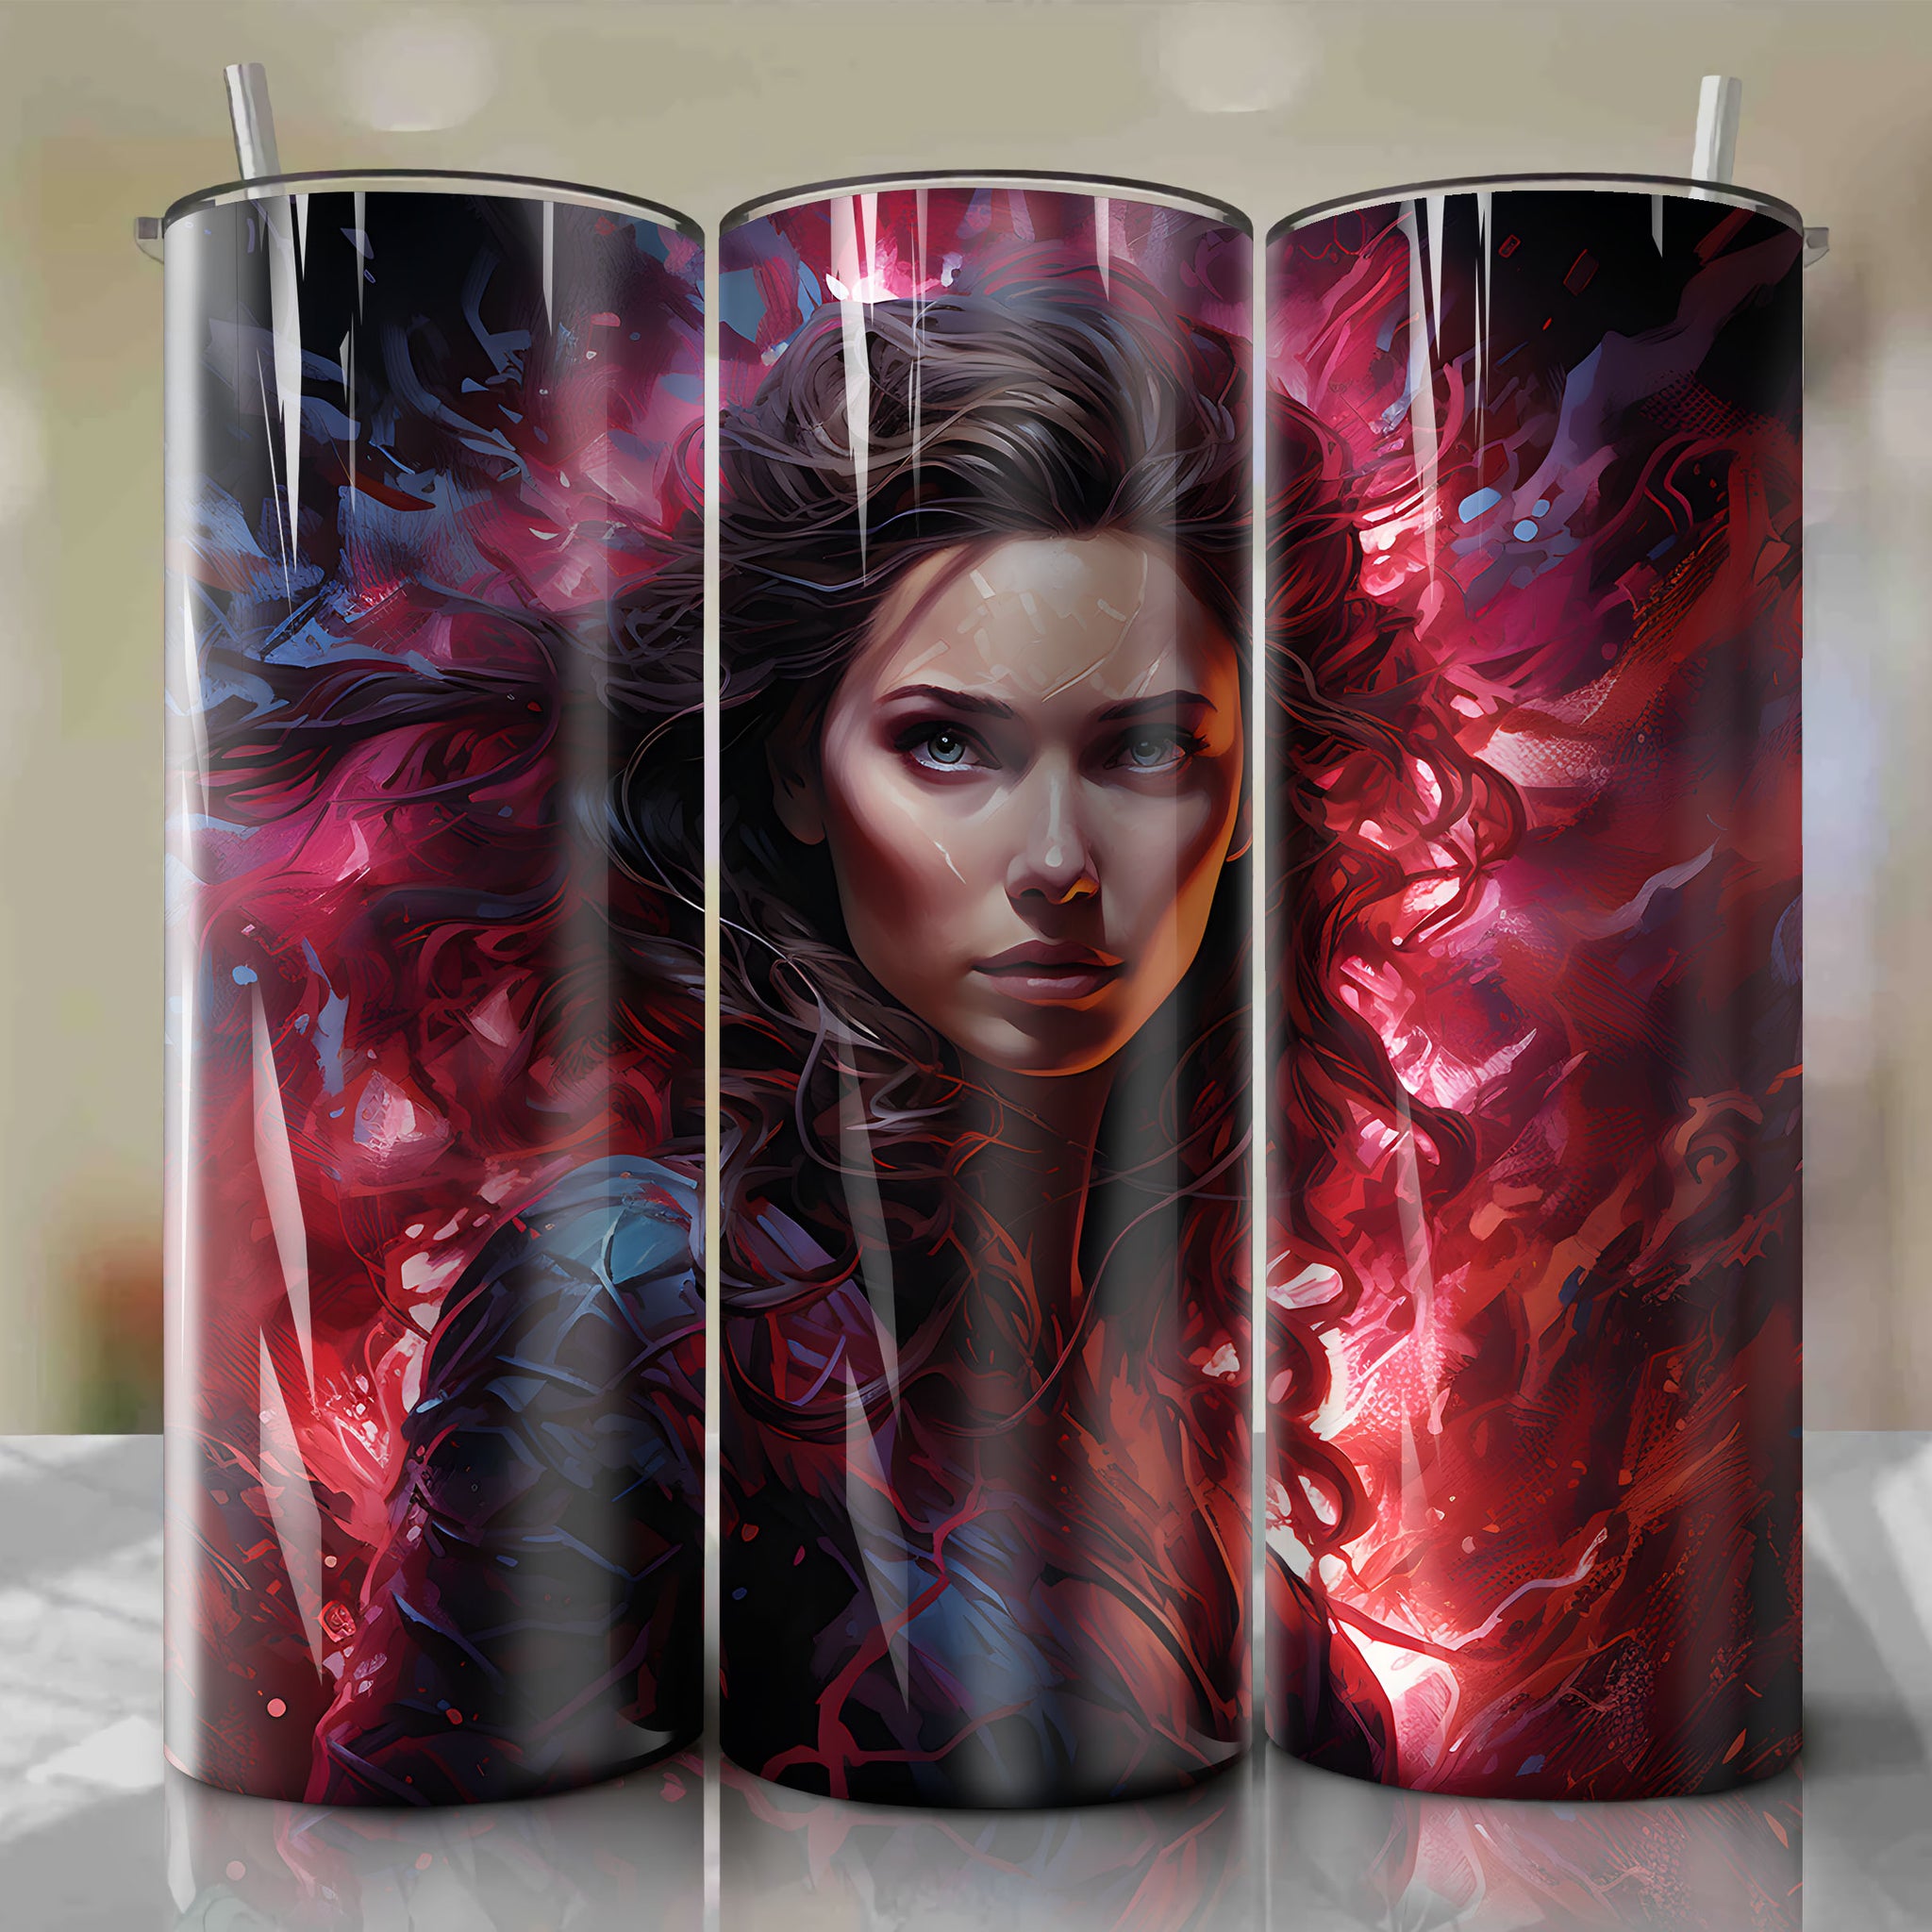 20 Oz Tumbler Wrap - Abstract Art Inspired by Scarlet Witch's Mysterious Energy
